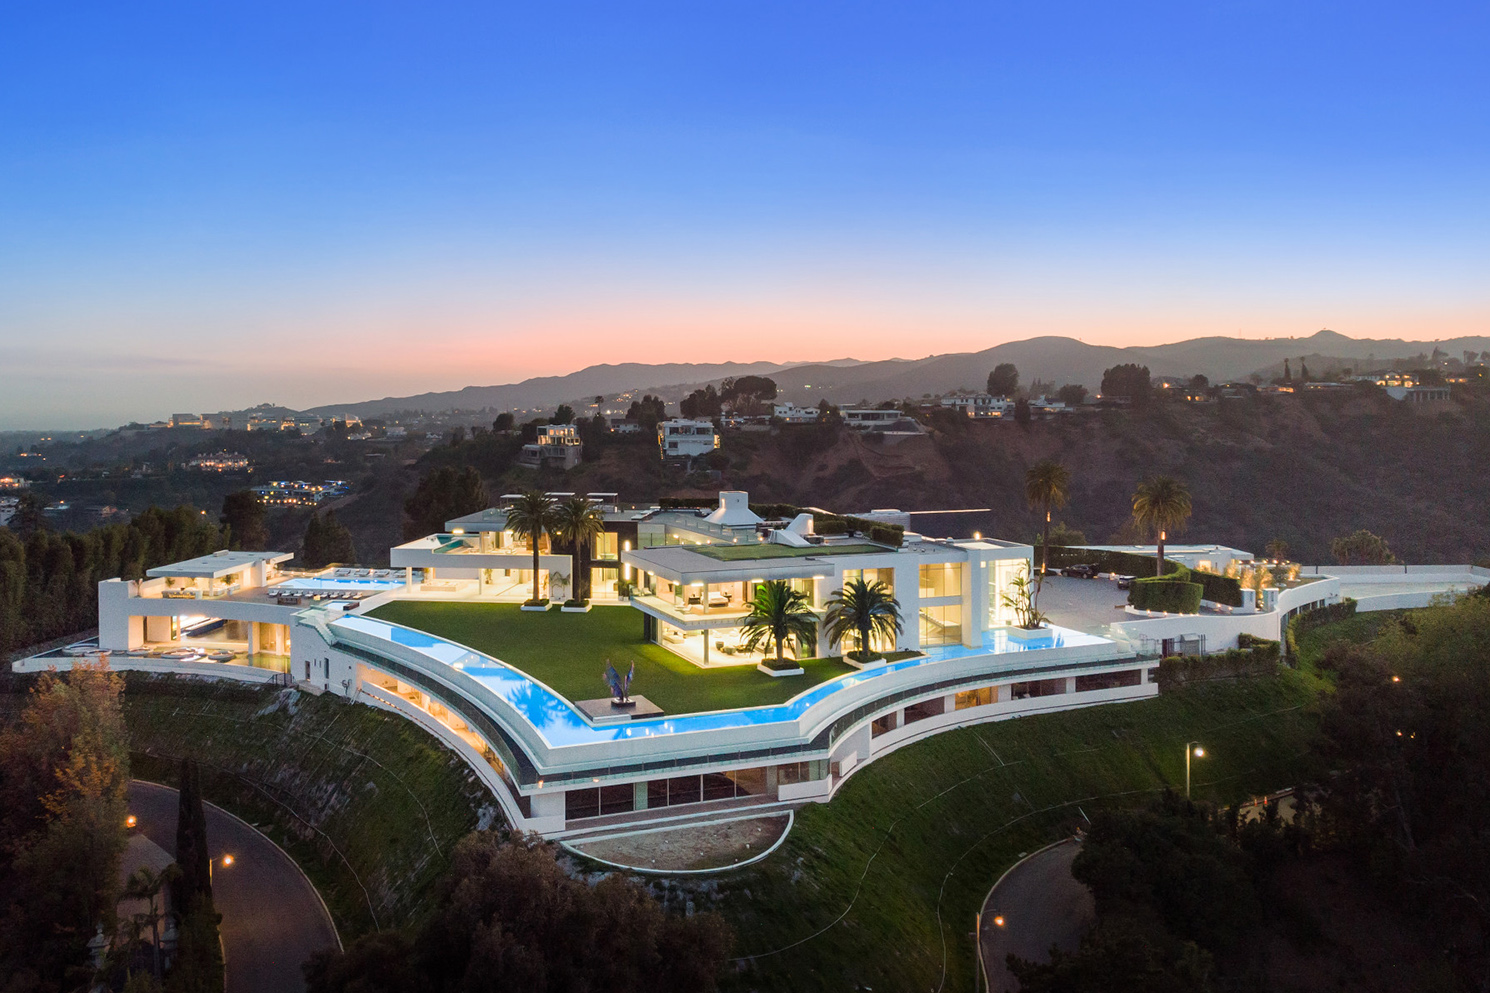 Aerial View of one of the worlds most expensive estates Bel Air California